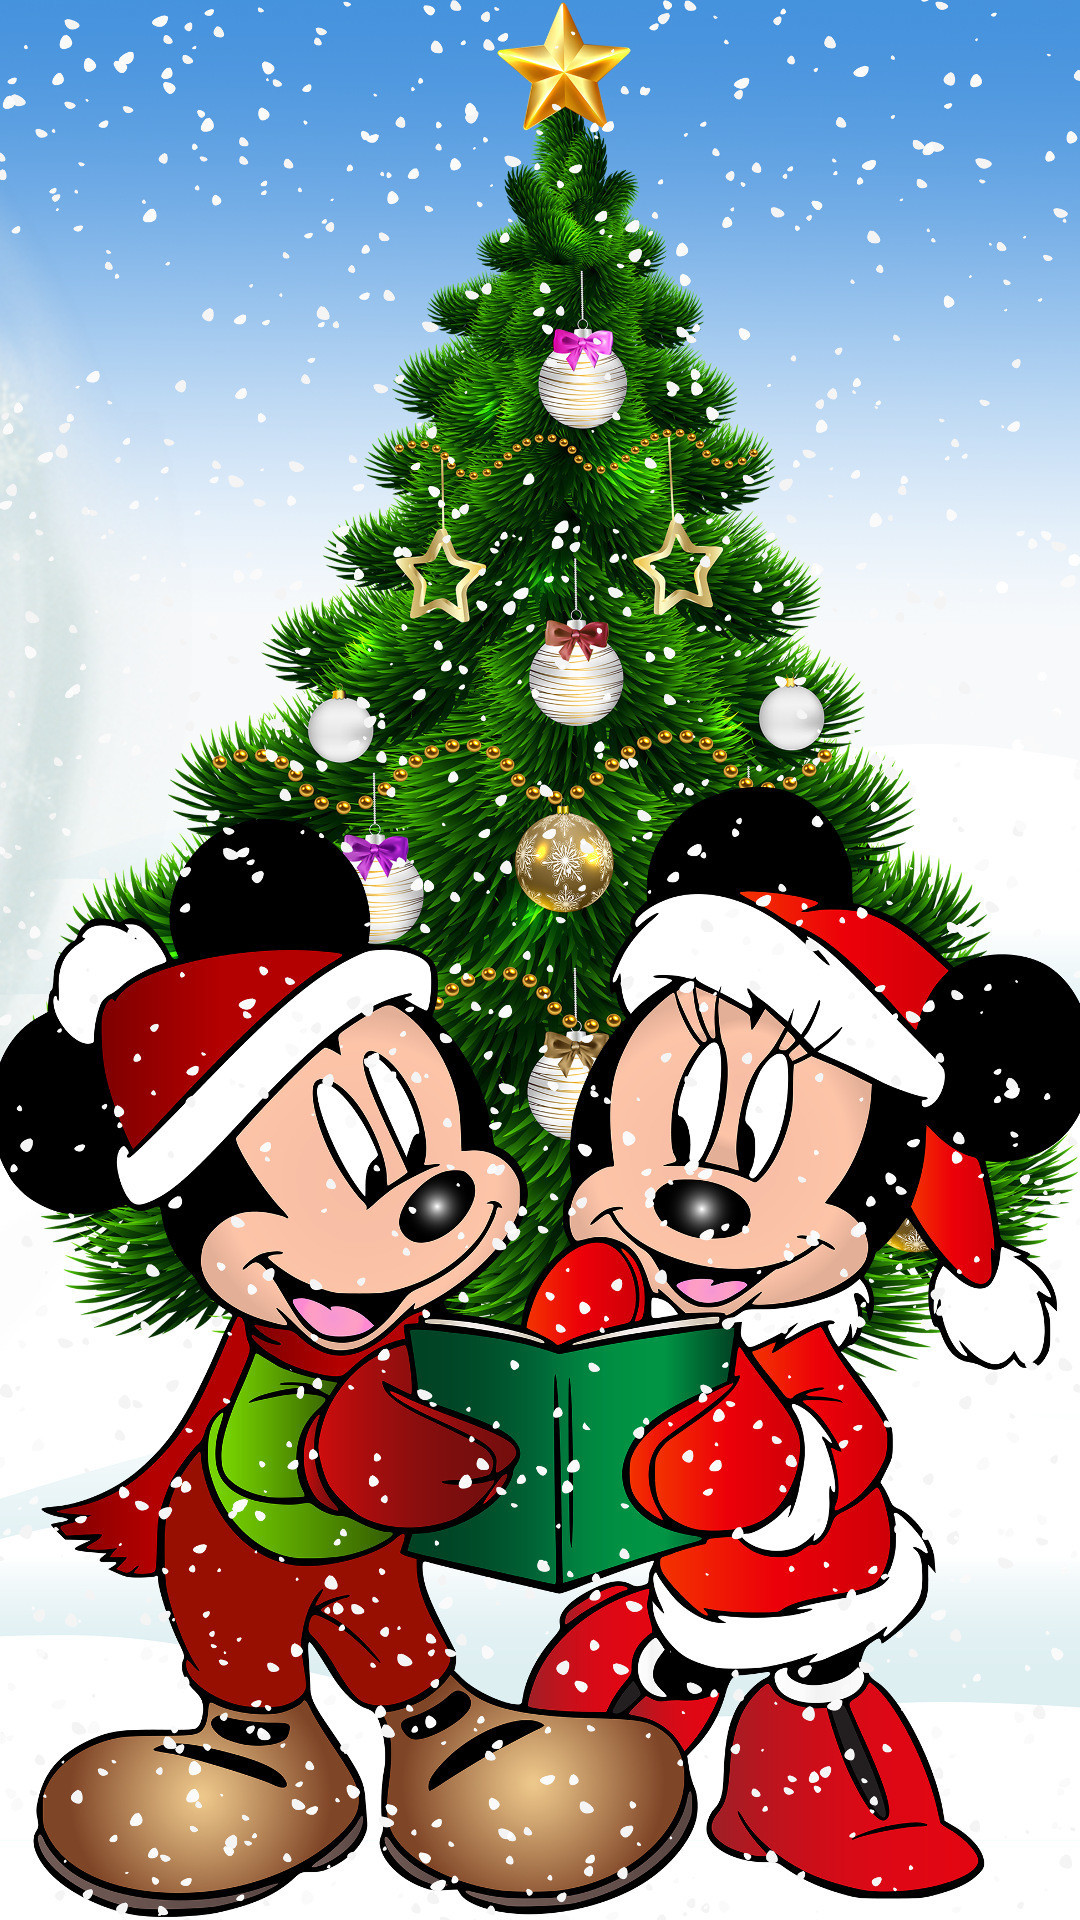 Disney Christmas Backgrounds (75+ images)